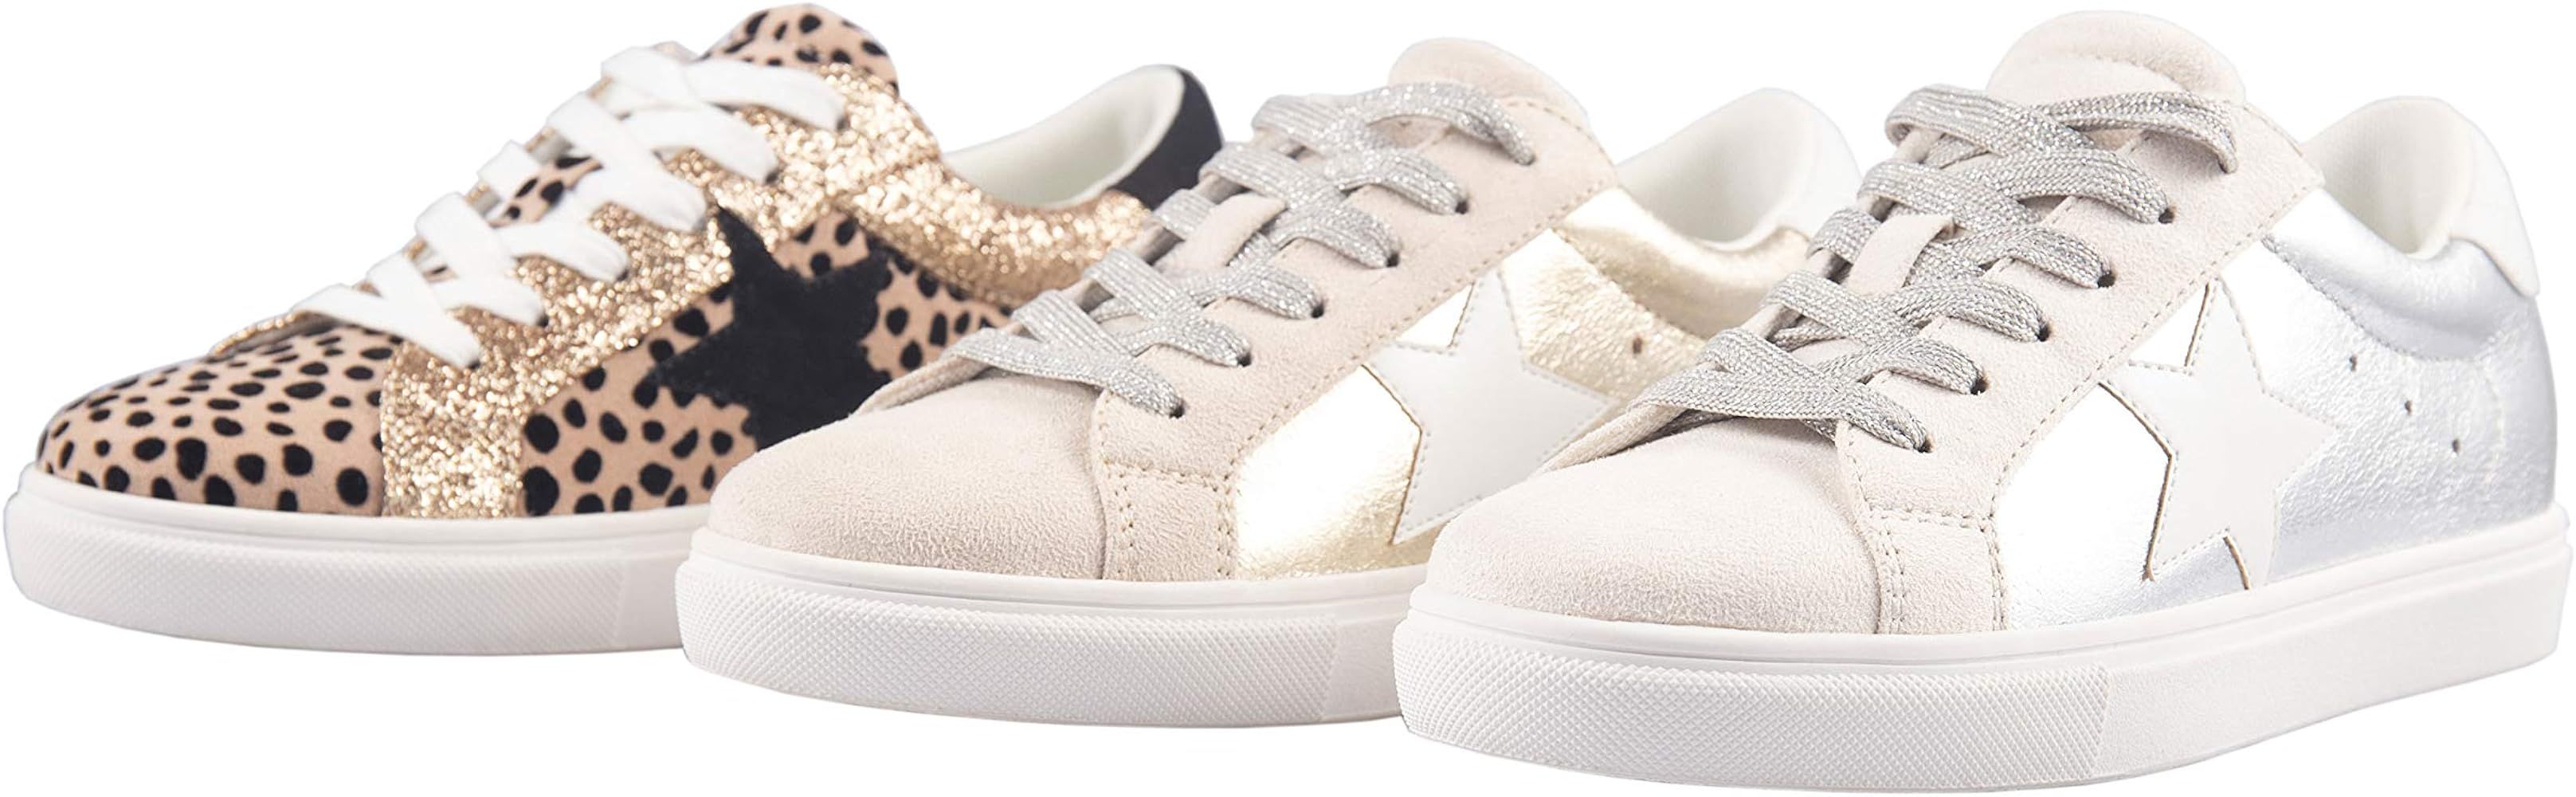 PARTY women sneakers focus on stylish designs, and are dedicated to creating new fashion sneakers fo | Amazon (US)